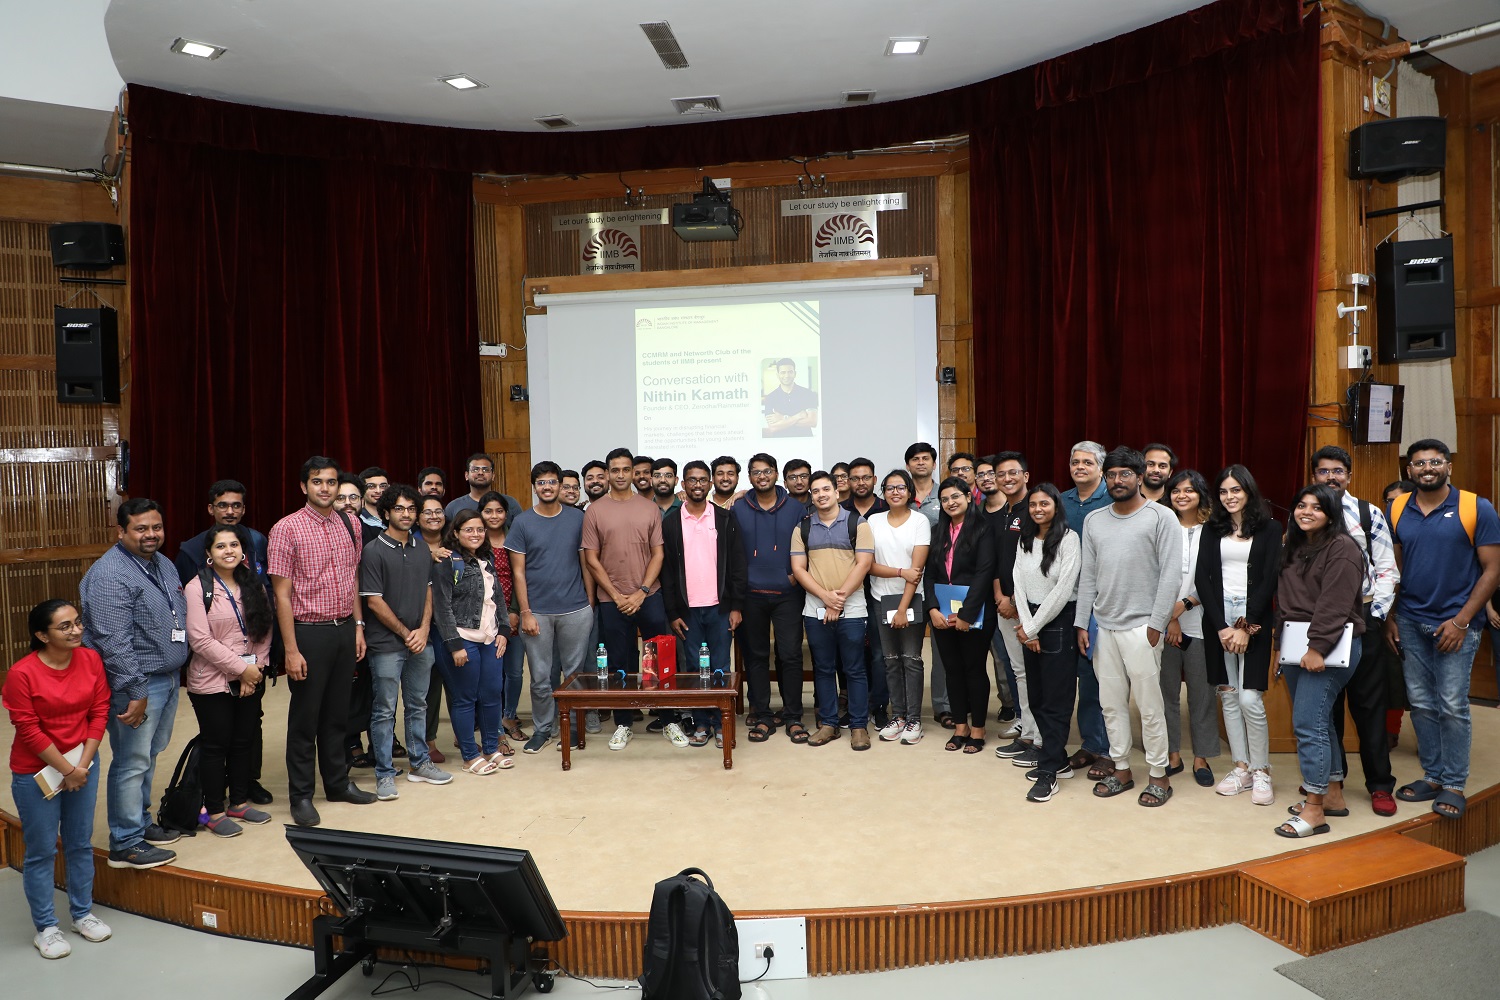 The Centre for Capital Markets and Risk Management at IIM Bangalore hosted a Conversation with Nithin Kamath, Founder CEO of Zerodha/ Rainmatter on November 14, 2022.